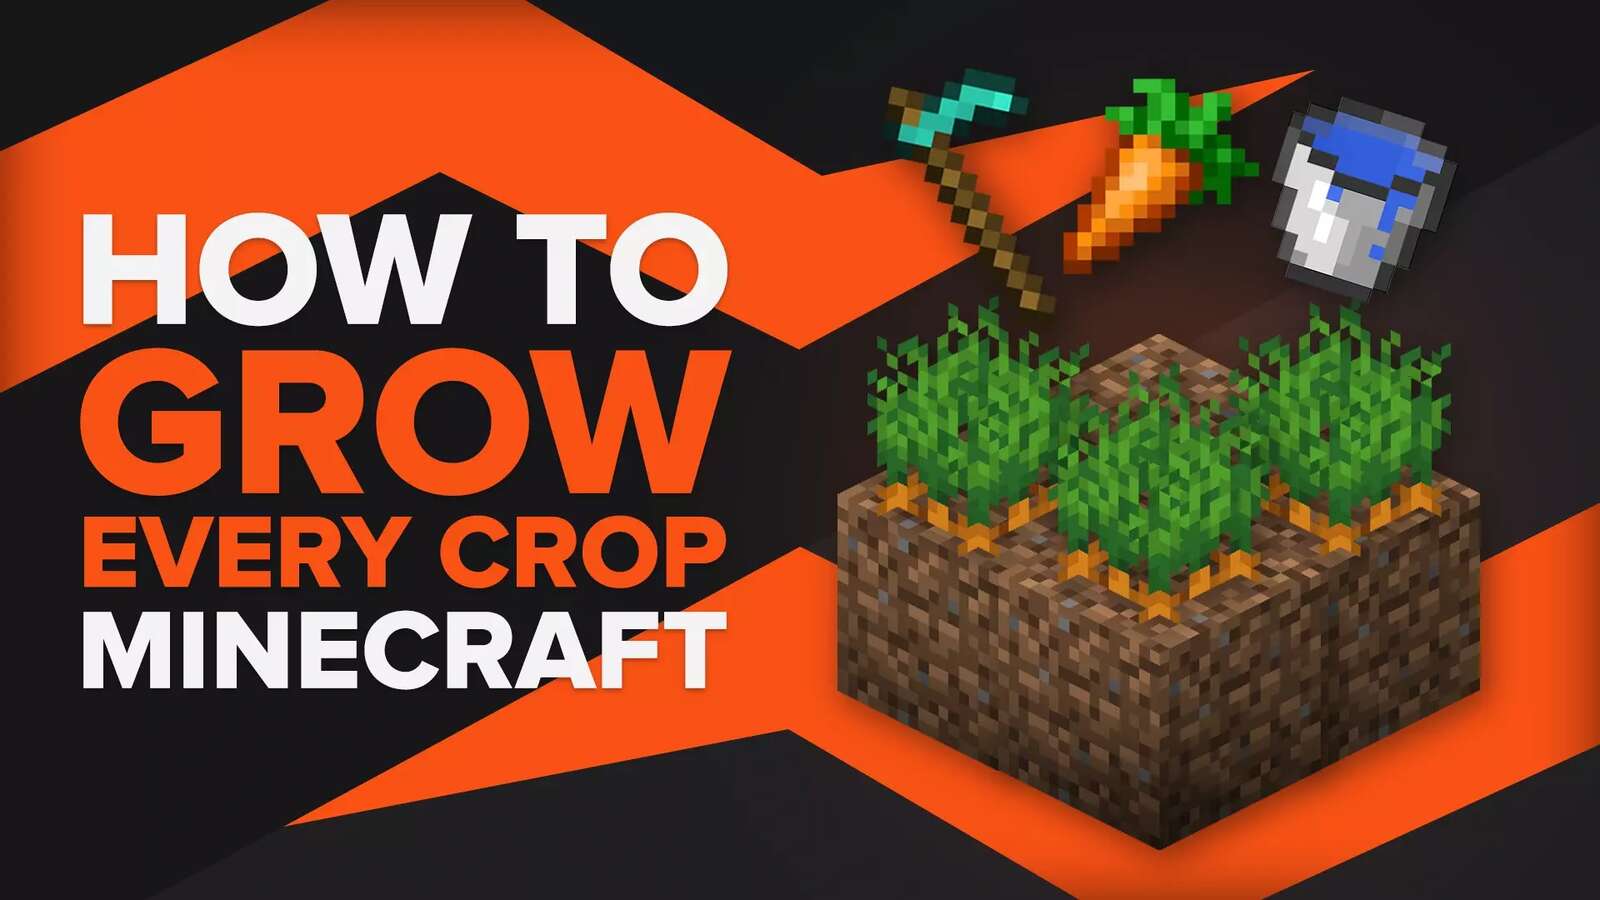 Here's How to Grow Every Crop in Minecraft: Farming Guide